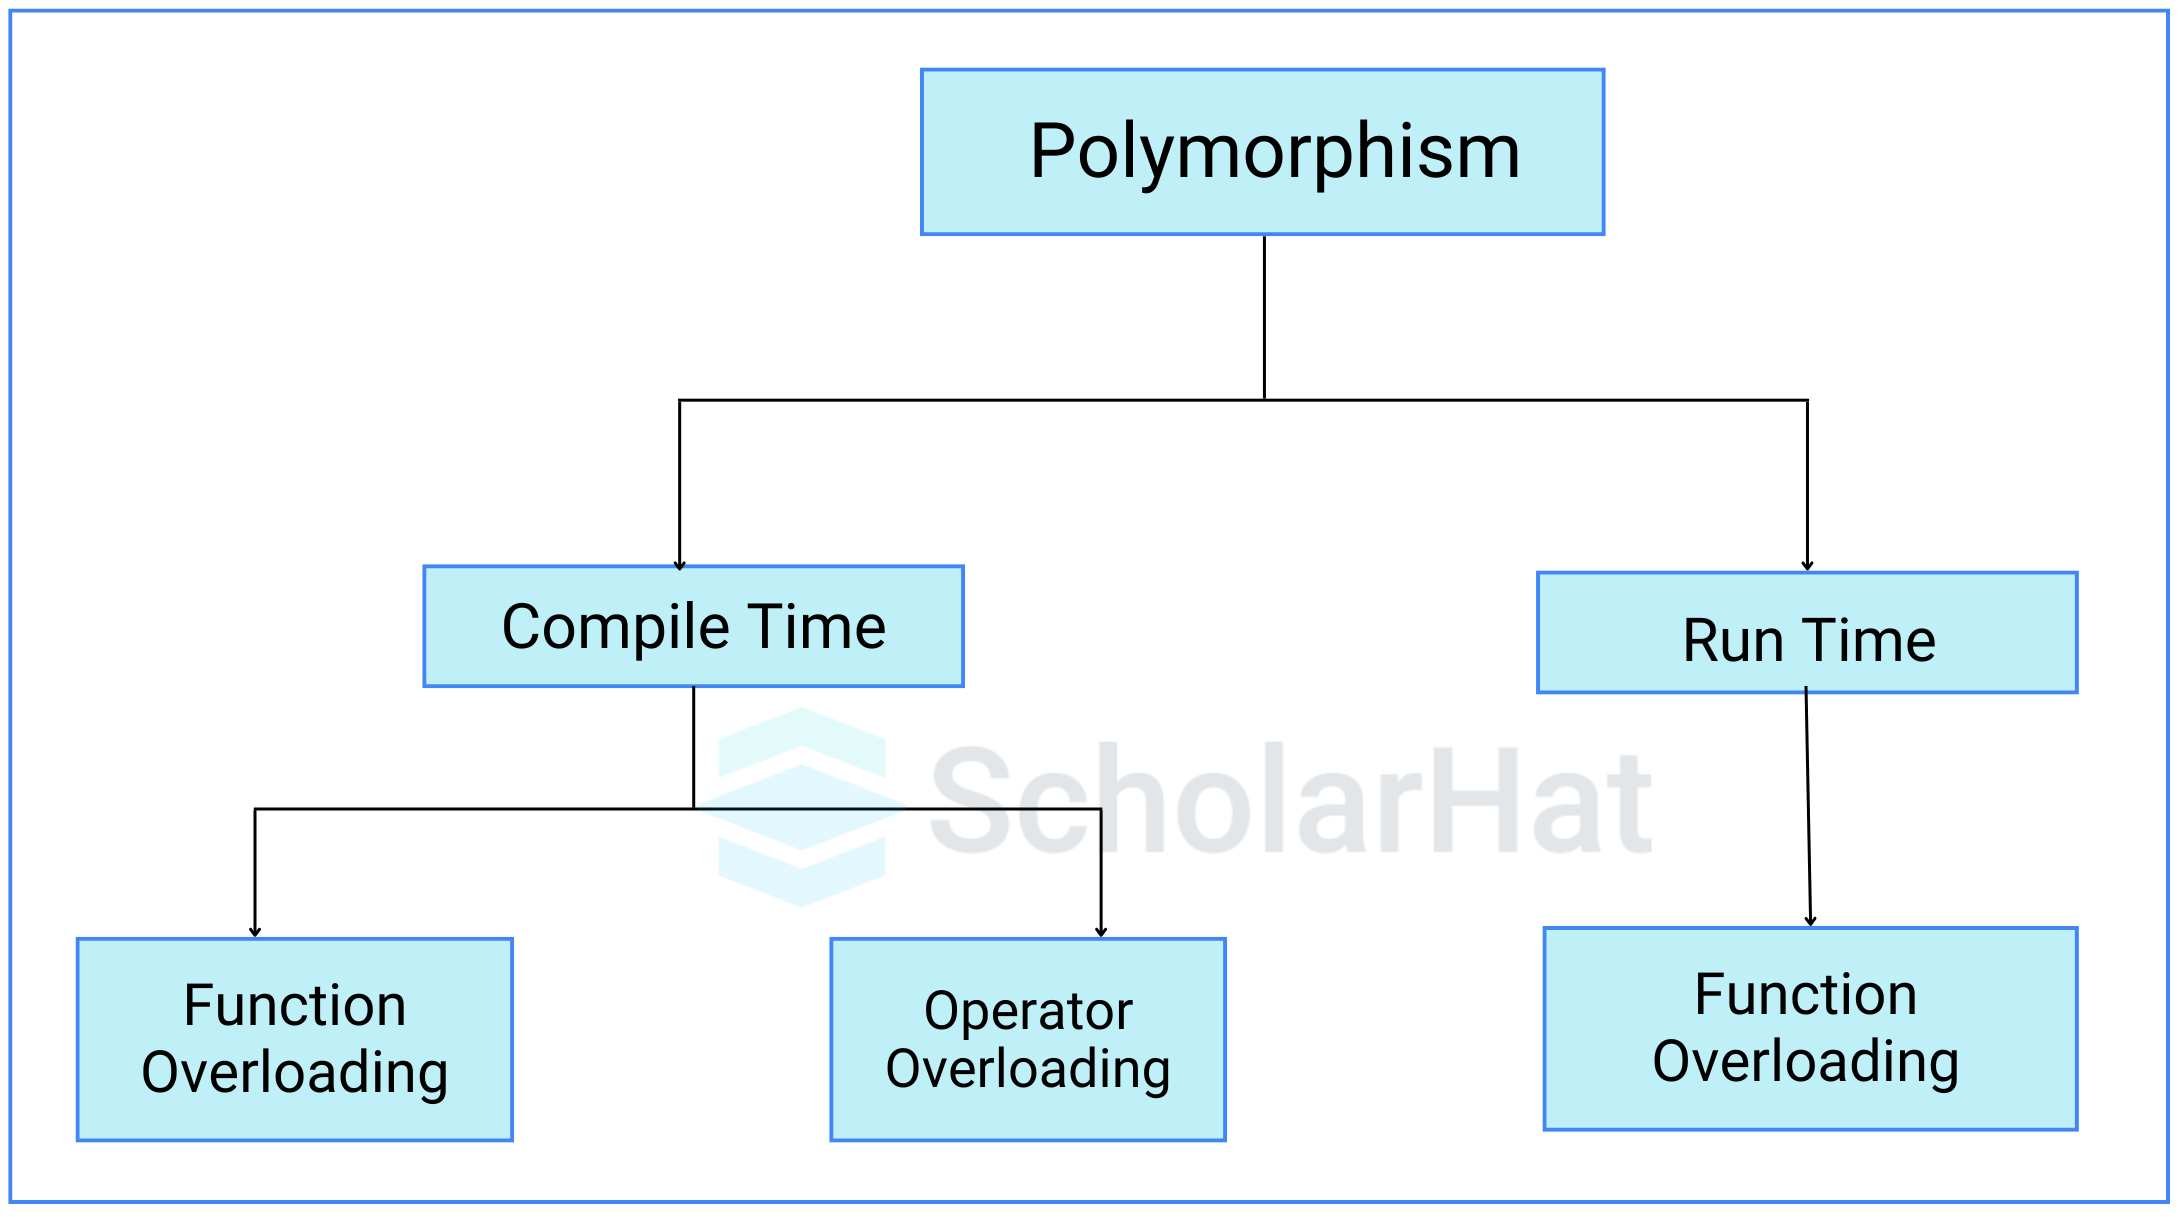 What are the different types of polymorphism?